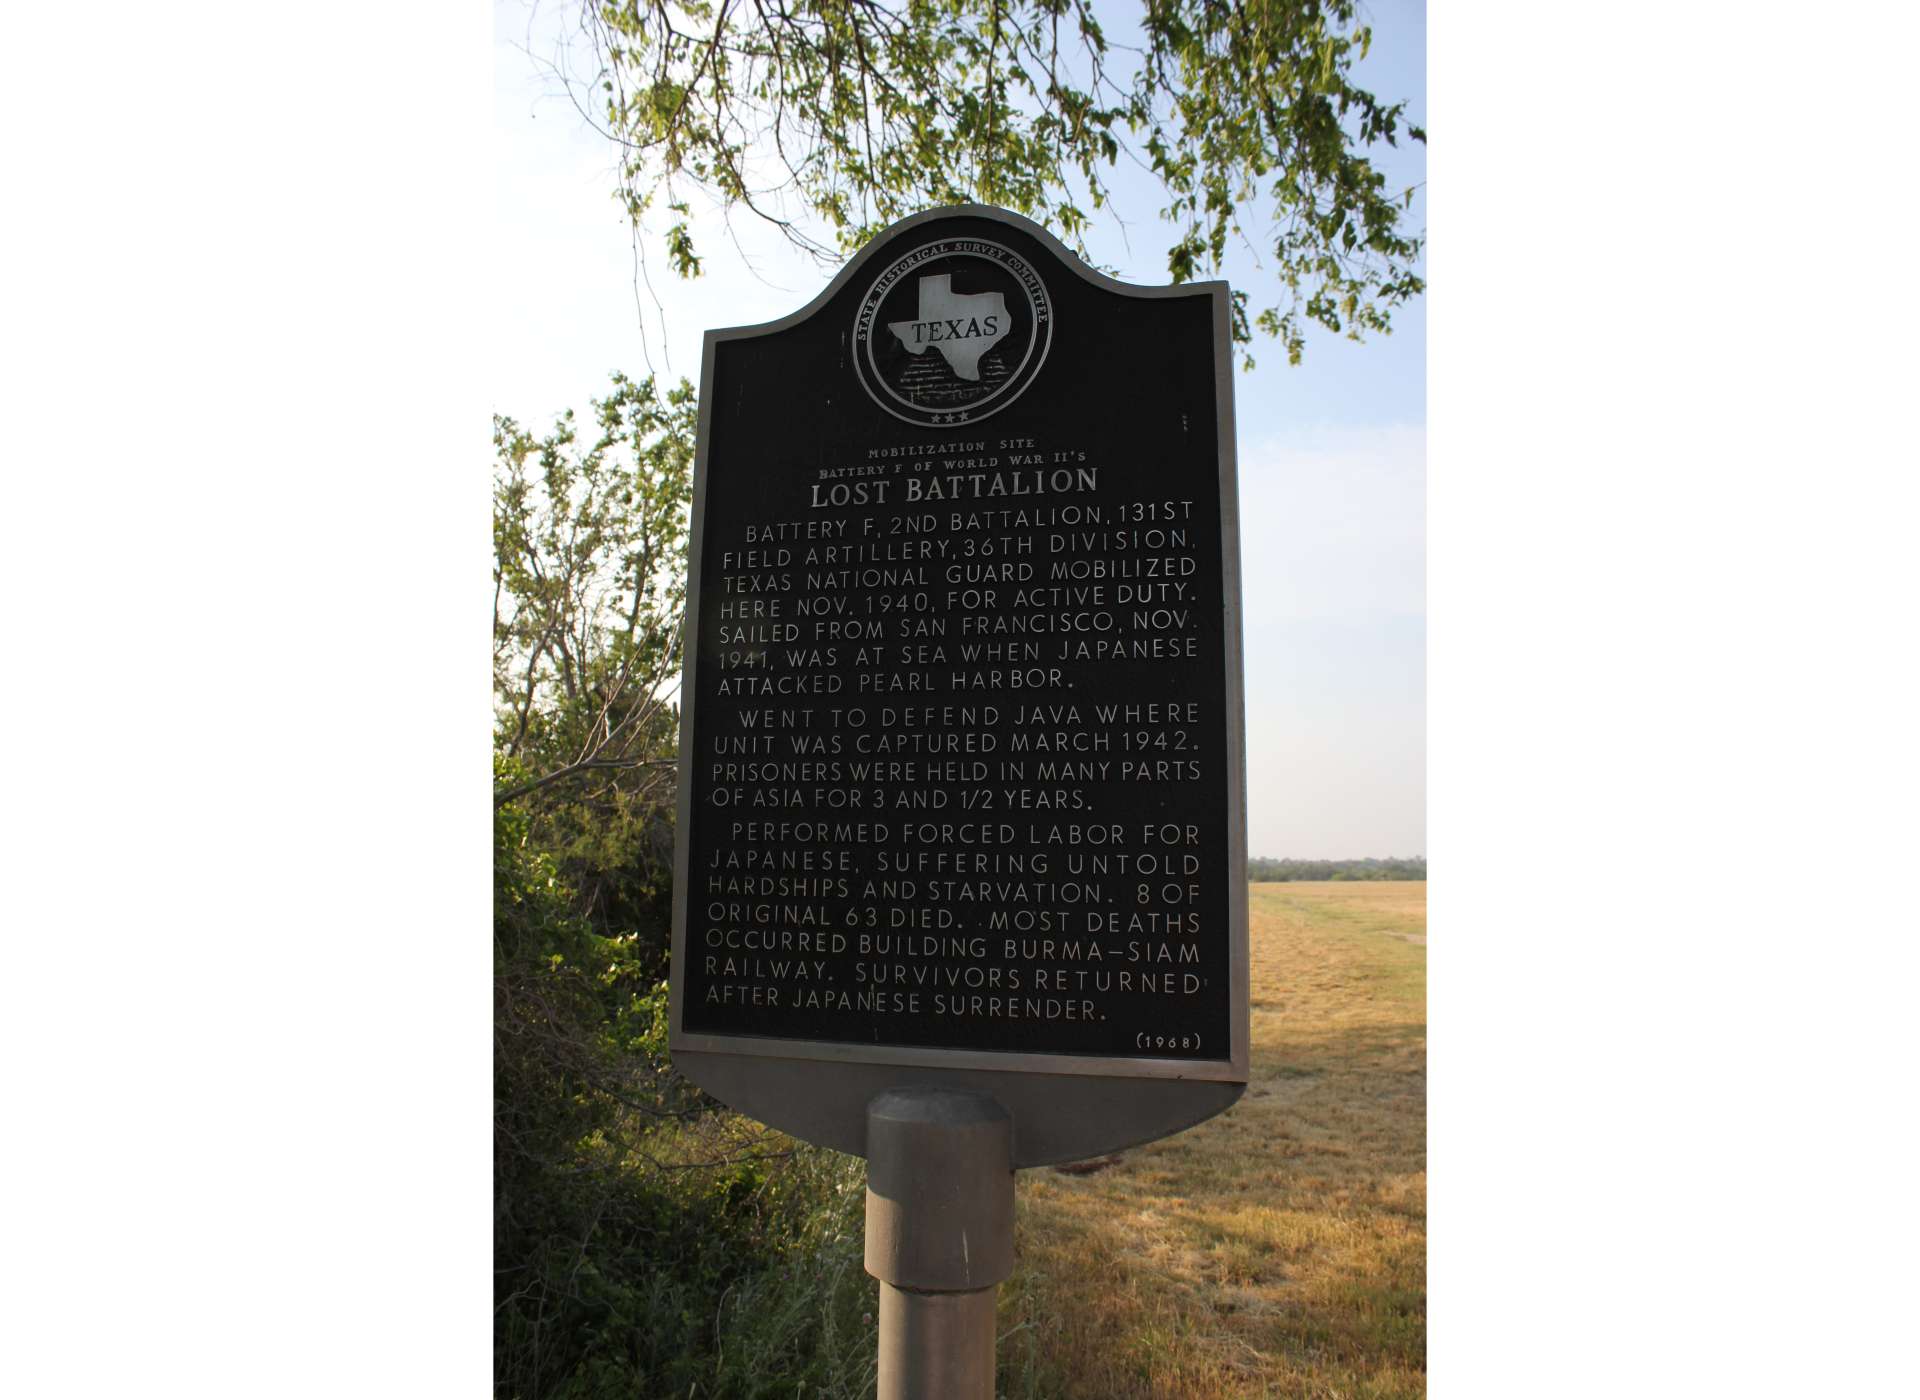 Historical marker commemorating the Lost Battalion at Jacksboro, Texas, courtesy of Wiki Commons.